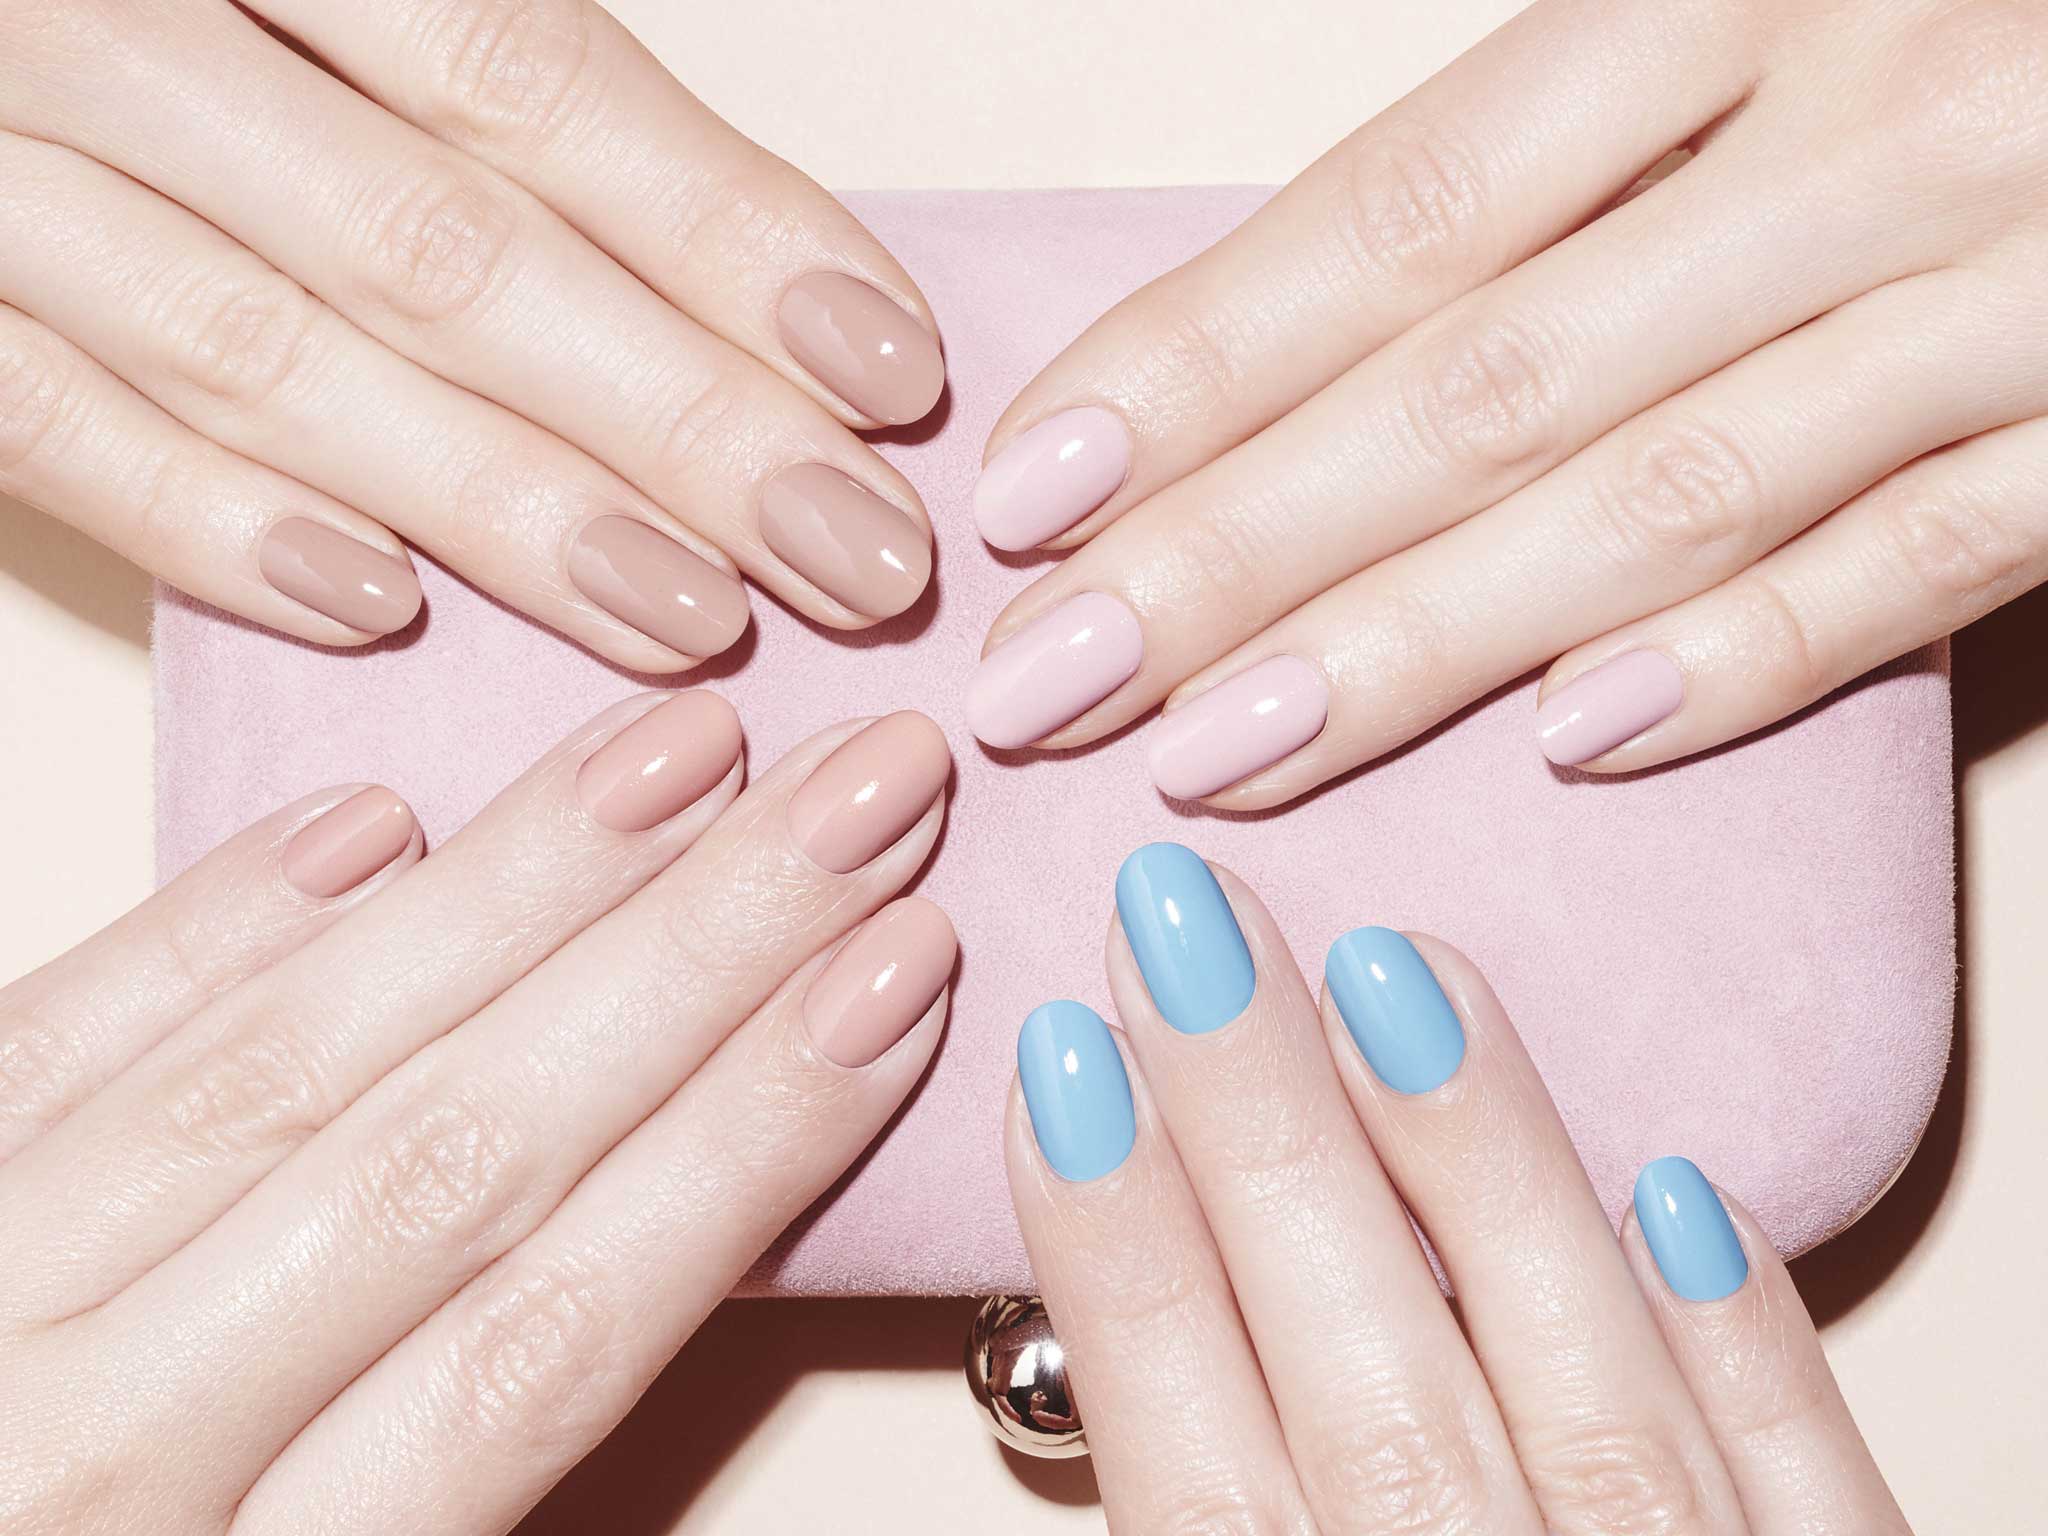 2. "Birthday Bash: The Best Nail Colors to Make a Statement" - wide 6